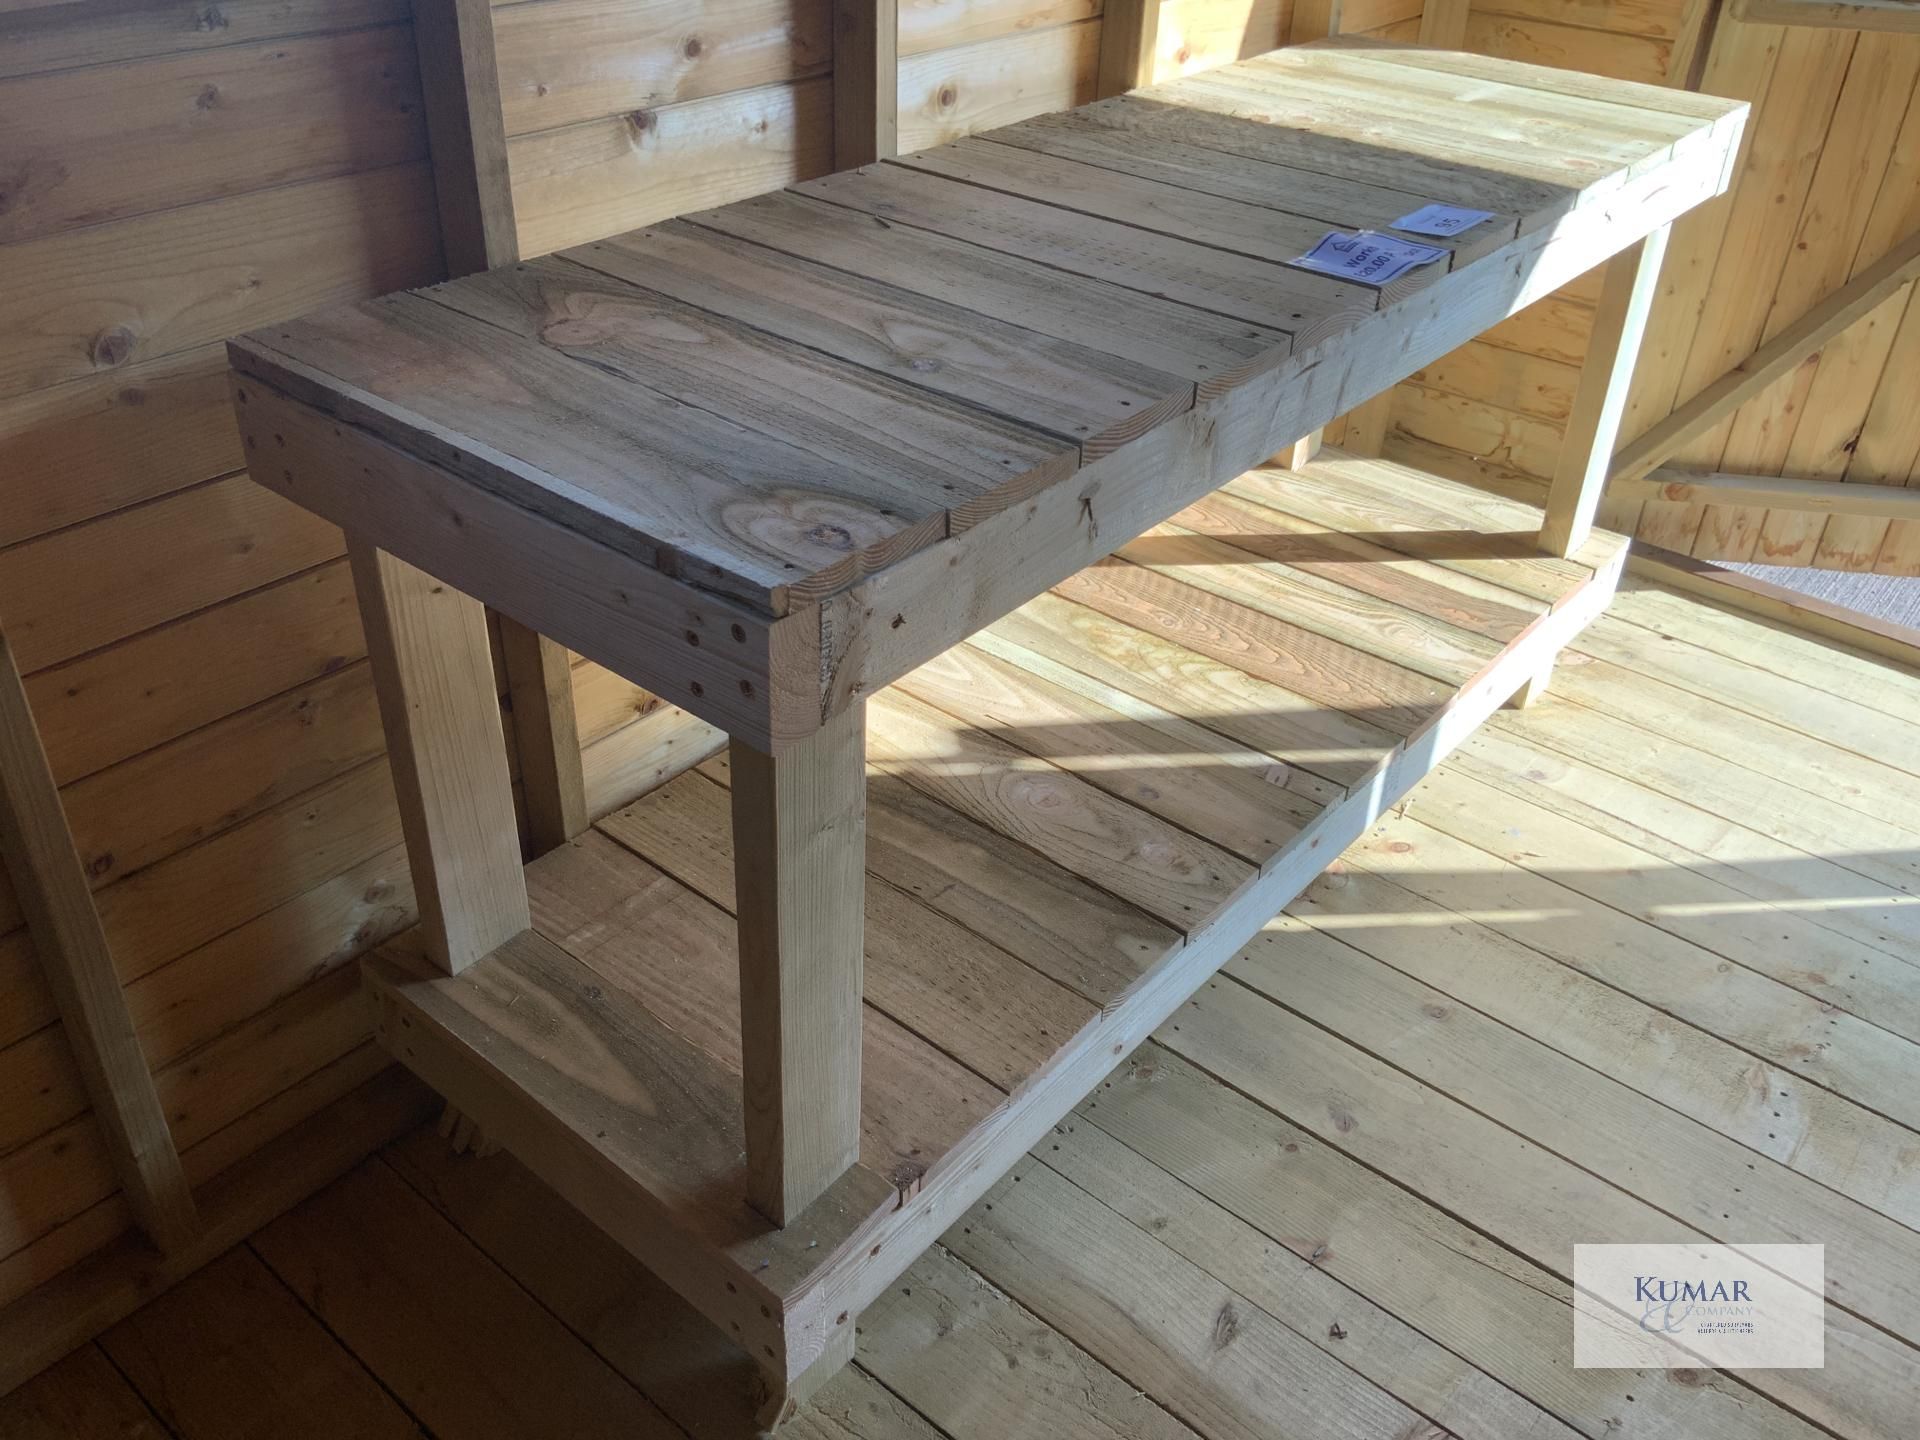 Wooden Work Bench Sizes, 182cm x 60cm x 90cm - Lot Location in Lot 94 - Image 4 of 6